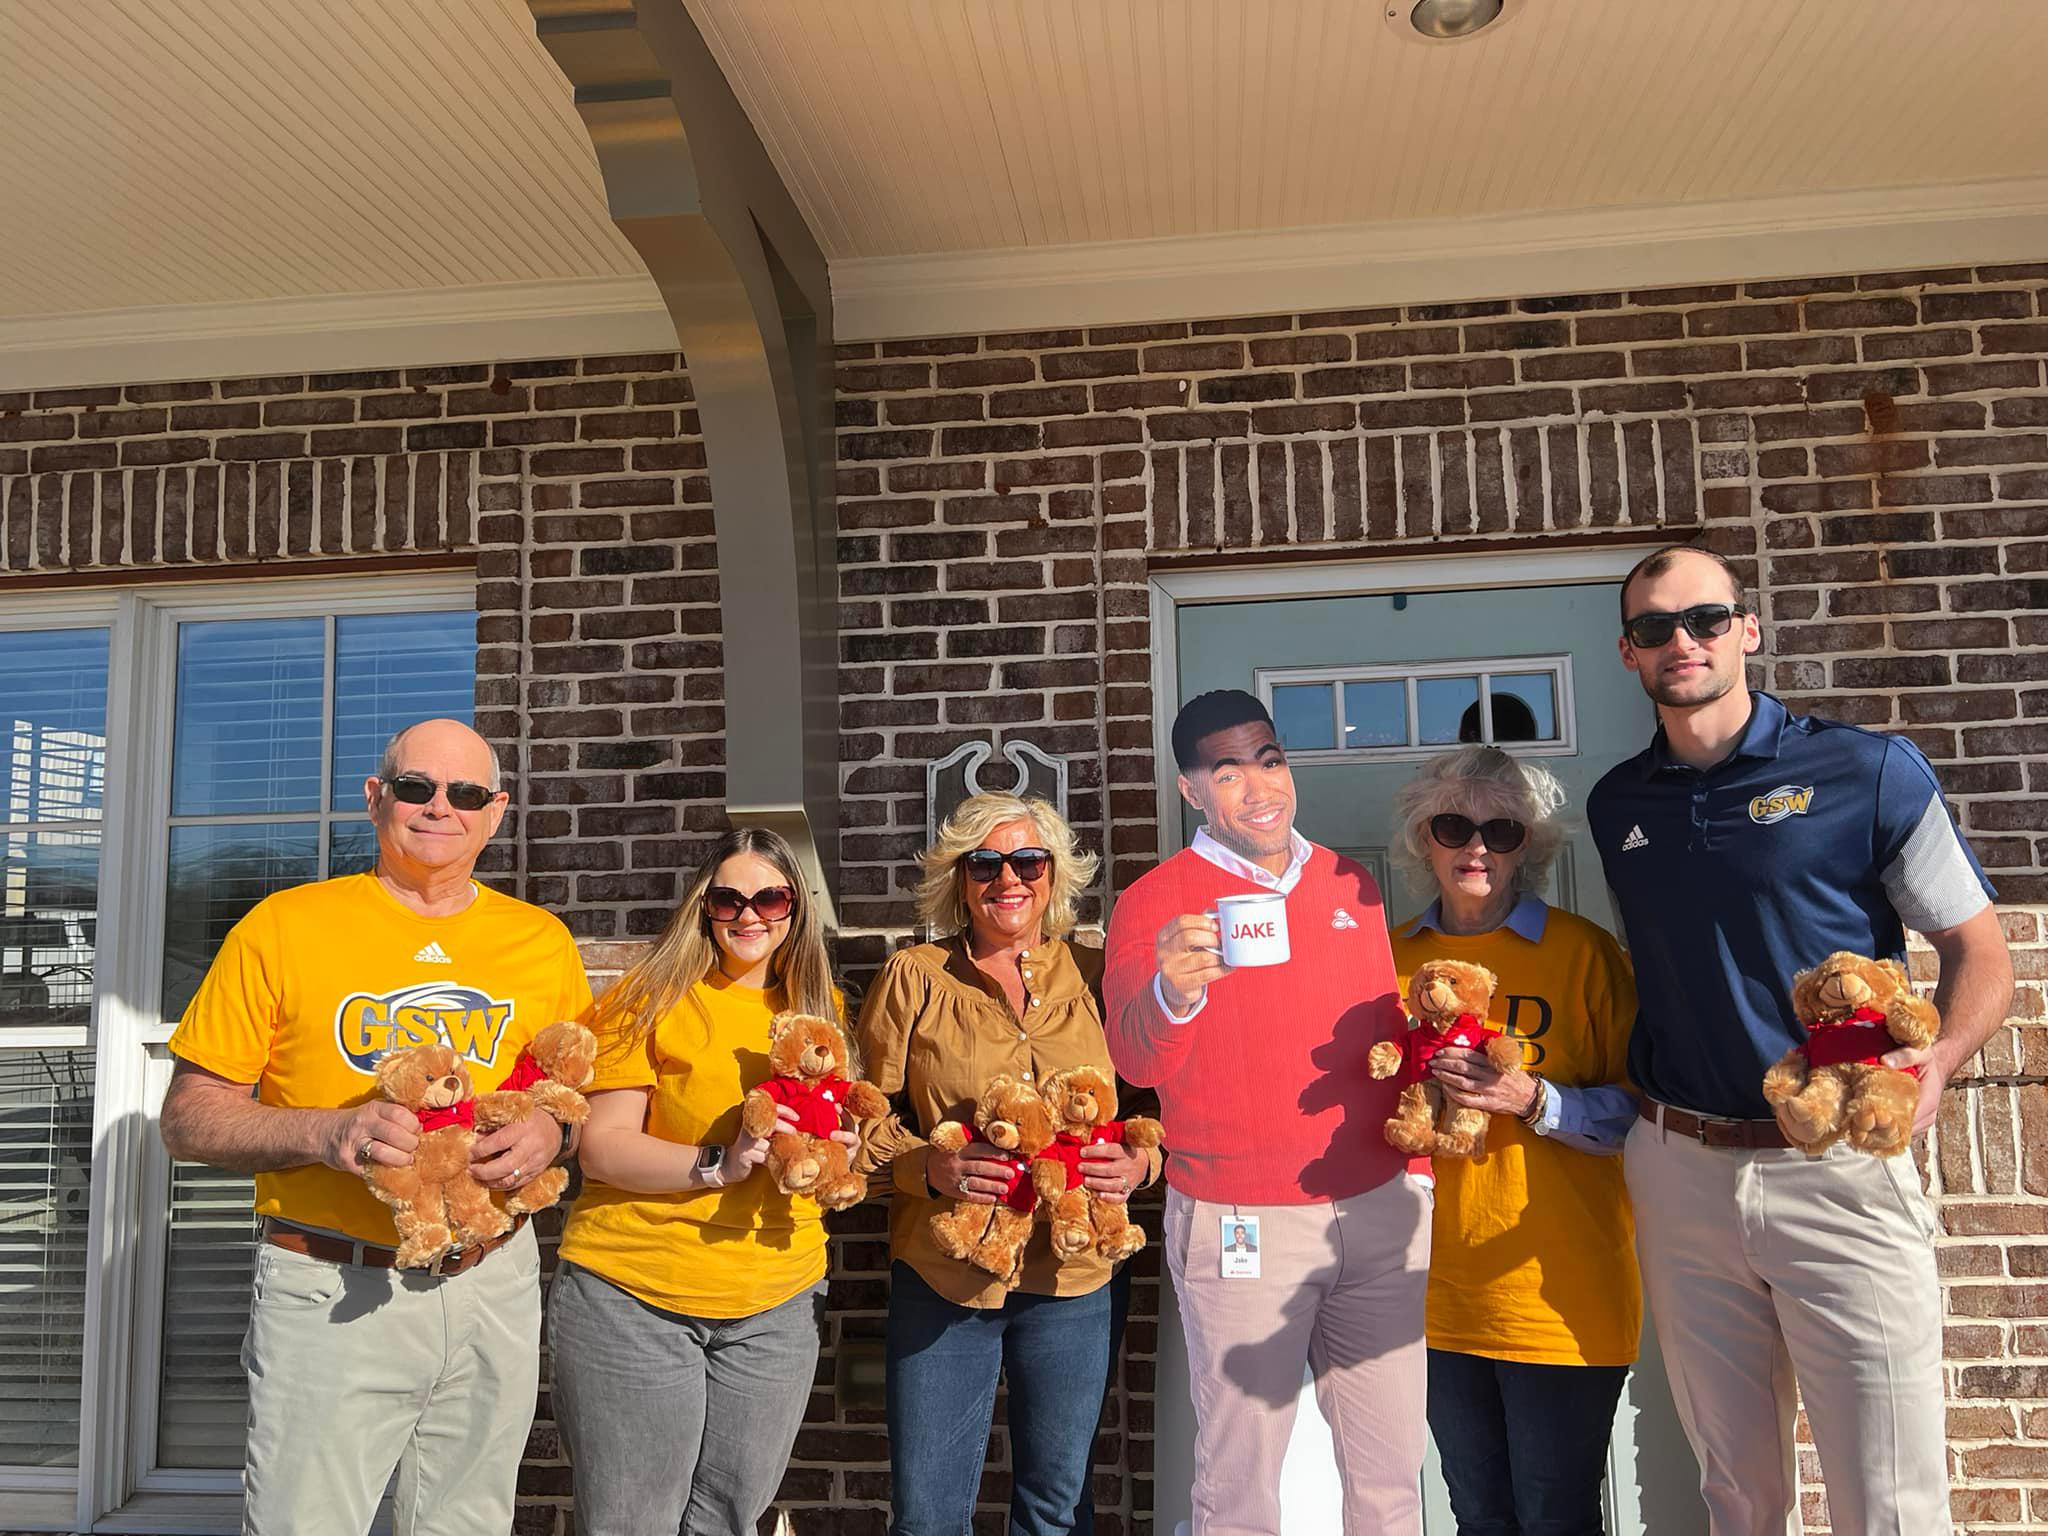 Be cool and join us for the annual Teddy Bear Toss at the GSW men’s basketball game!